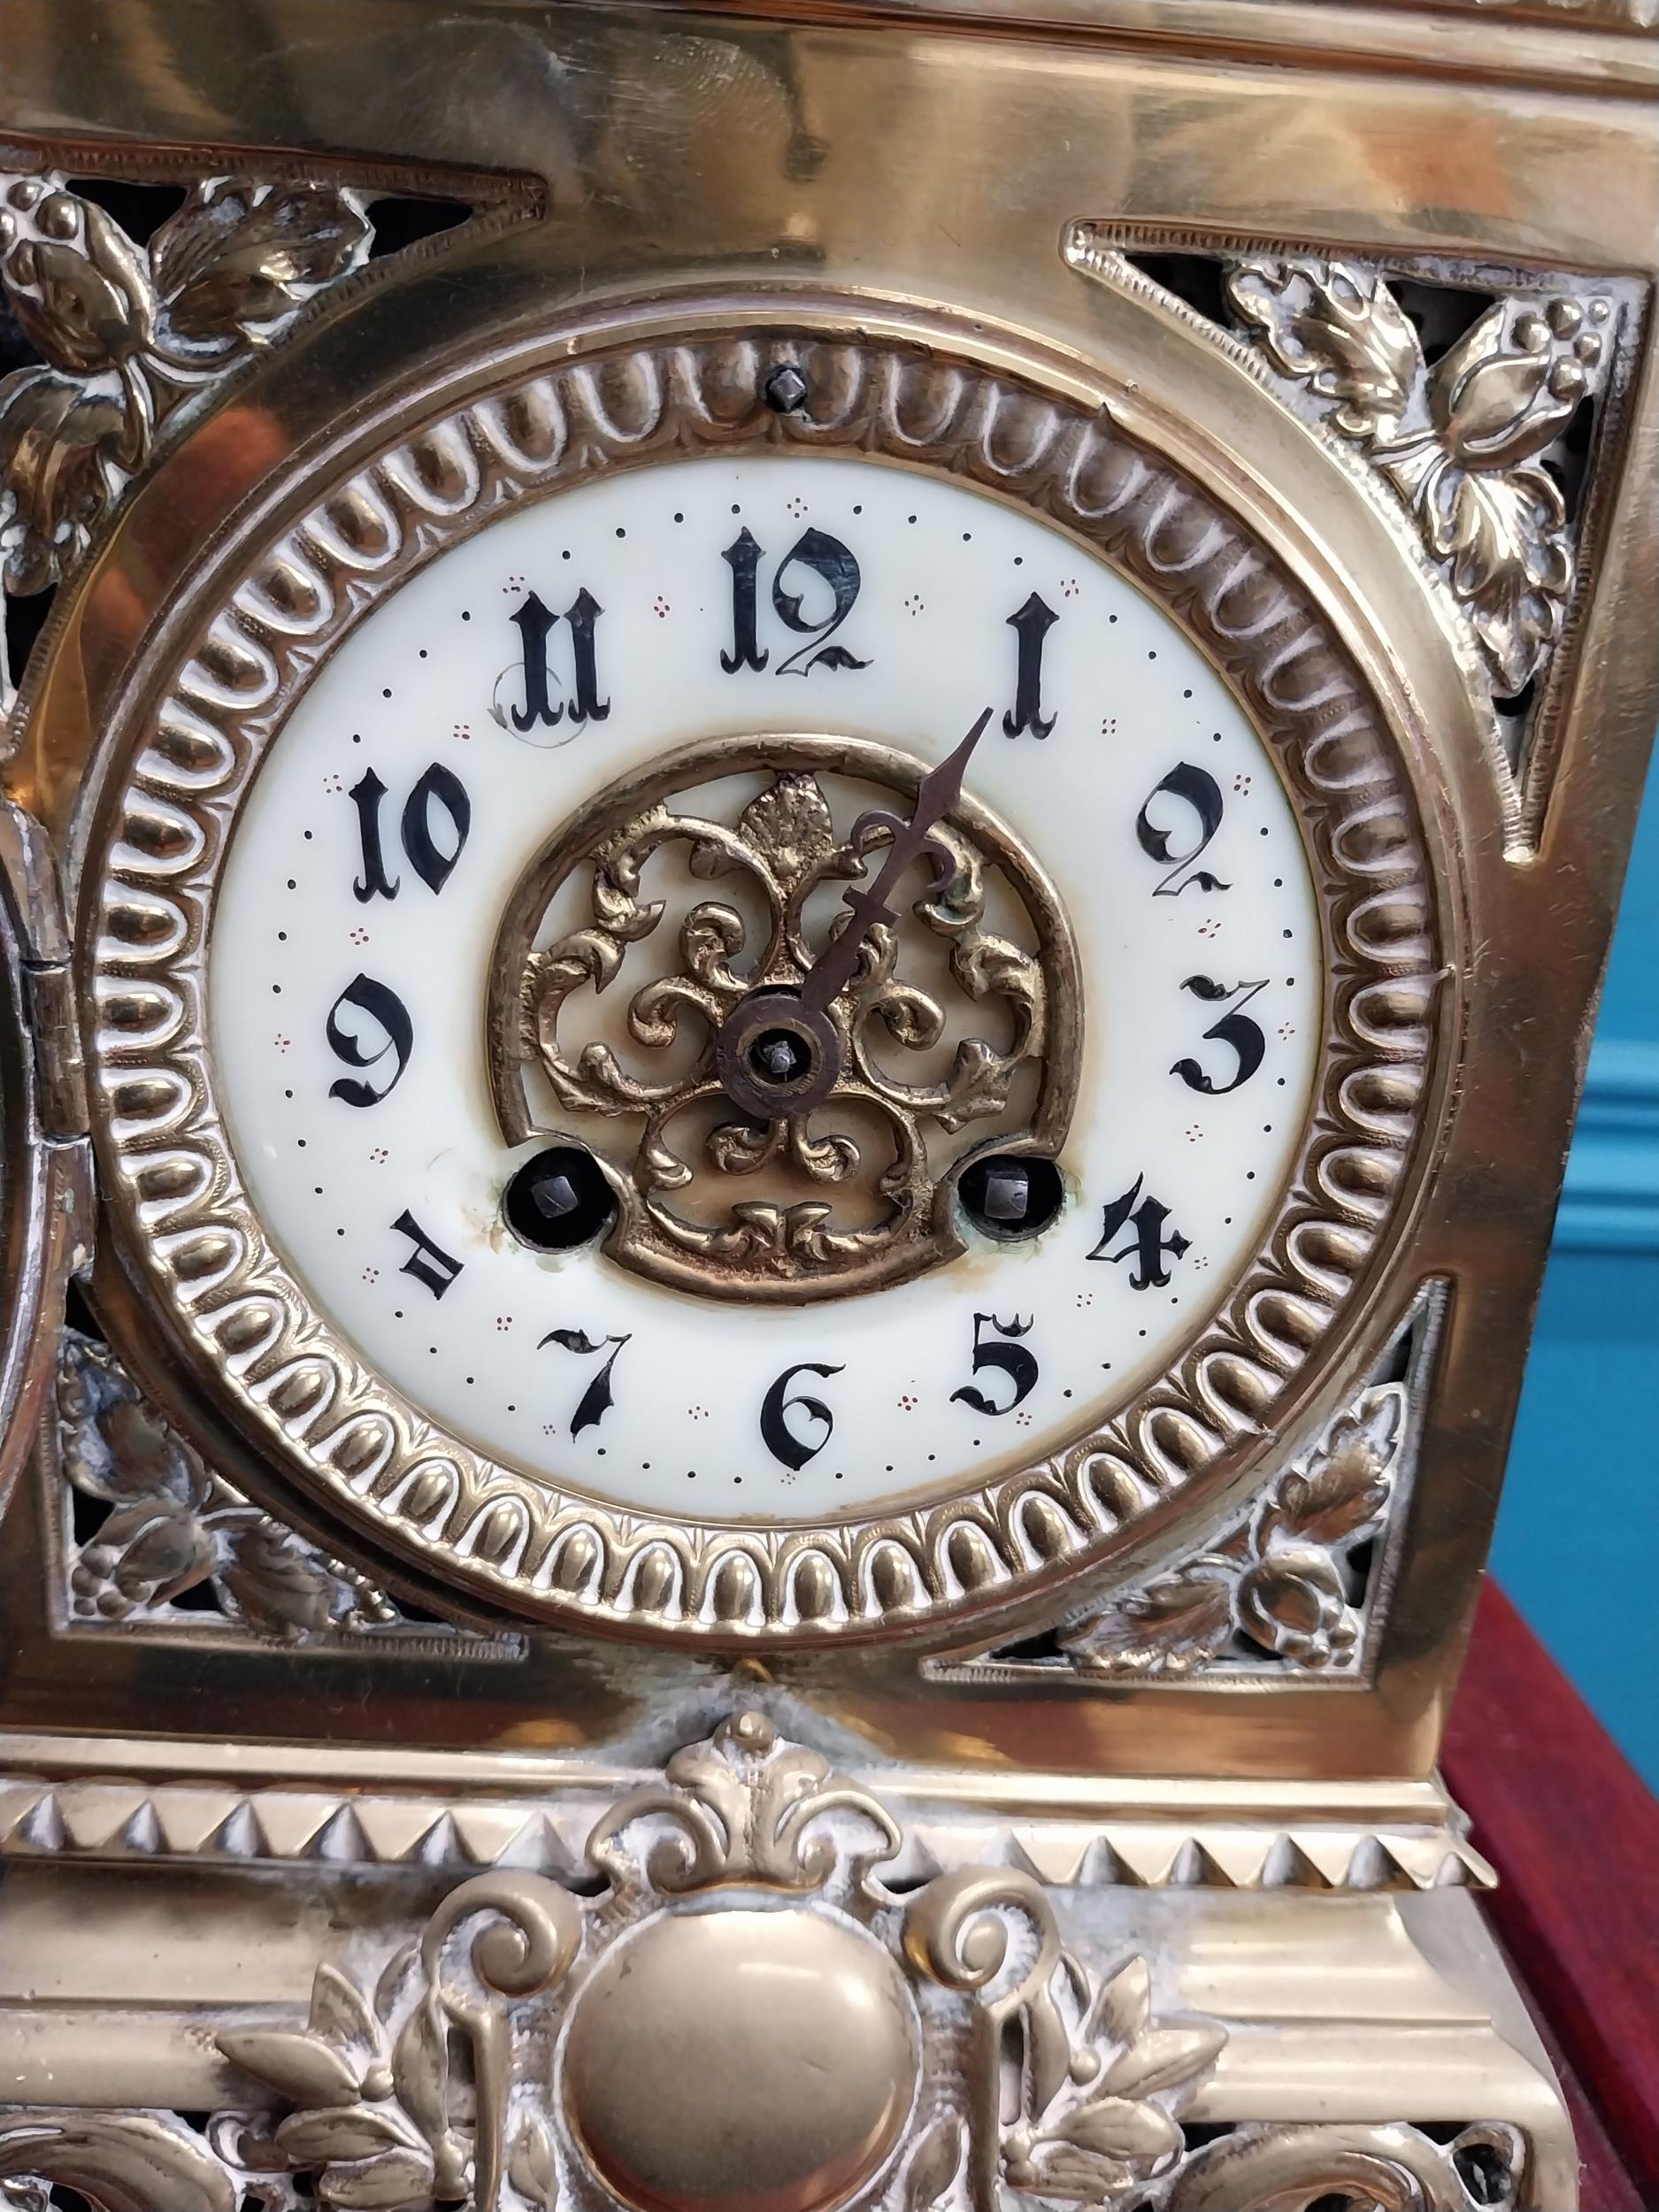 Decorative brass mantle clock in the Victorian style {39 cm H x 19 cm W x 19 cm D}. - Image 4 of 9